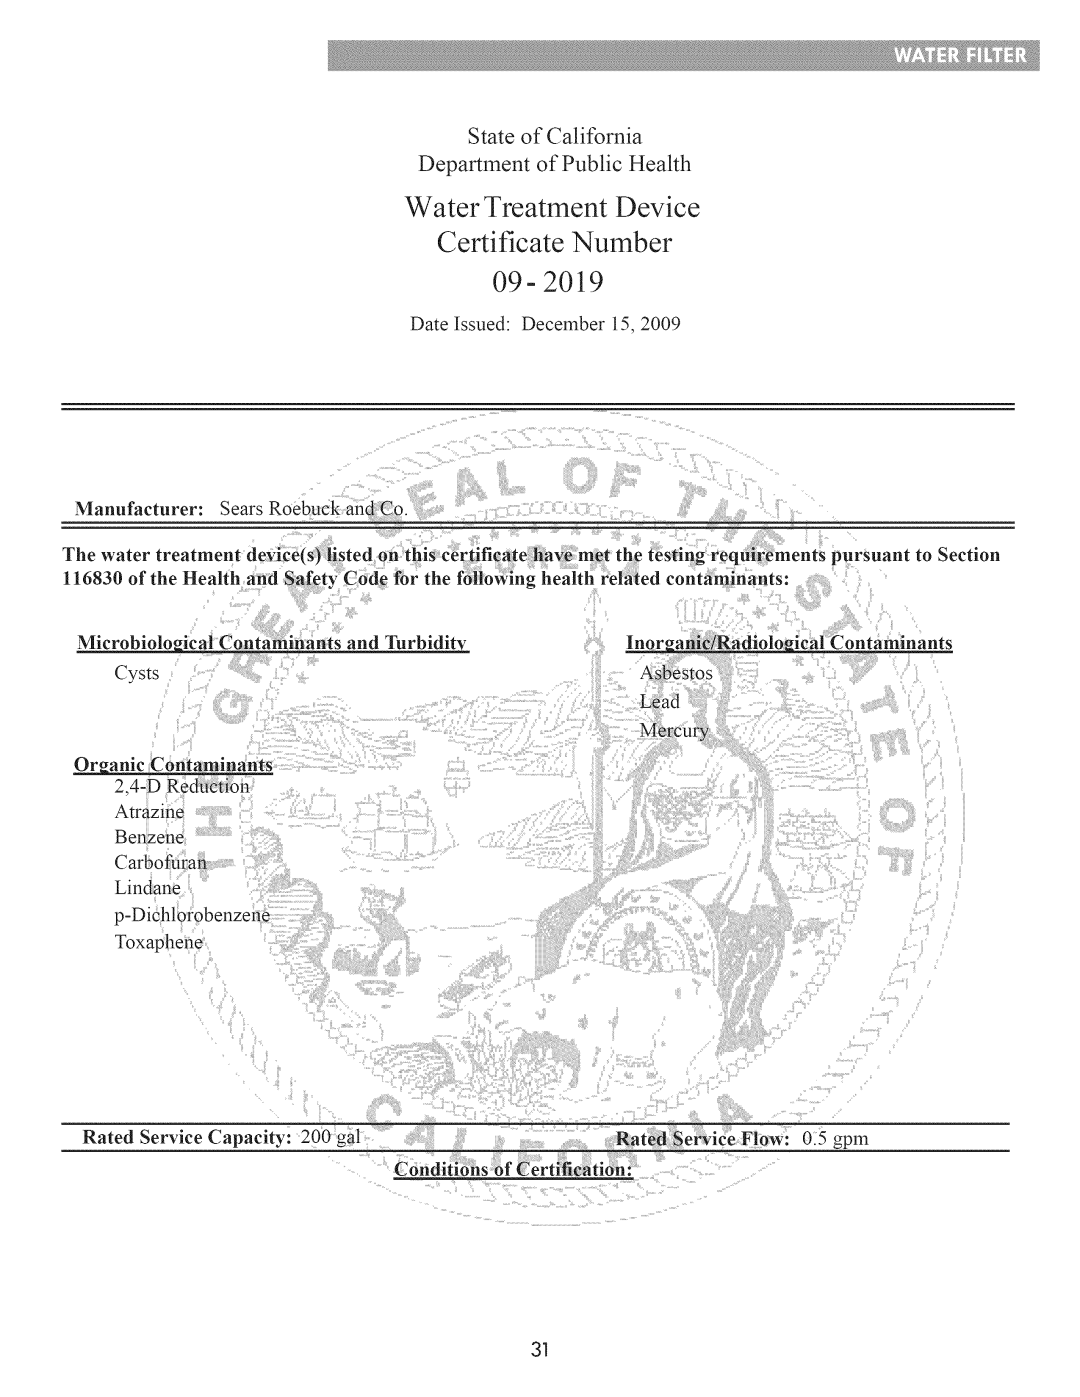 Kenmore 795.7103 Water Treatment Device Certificate Number, State of California Department of Public Health, Toxaphene 